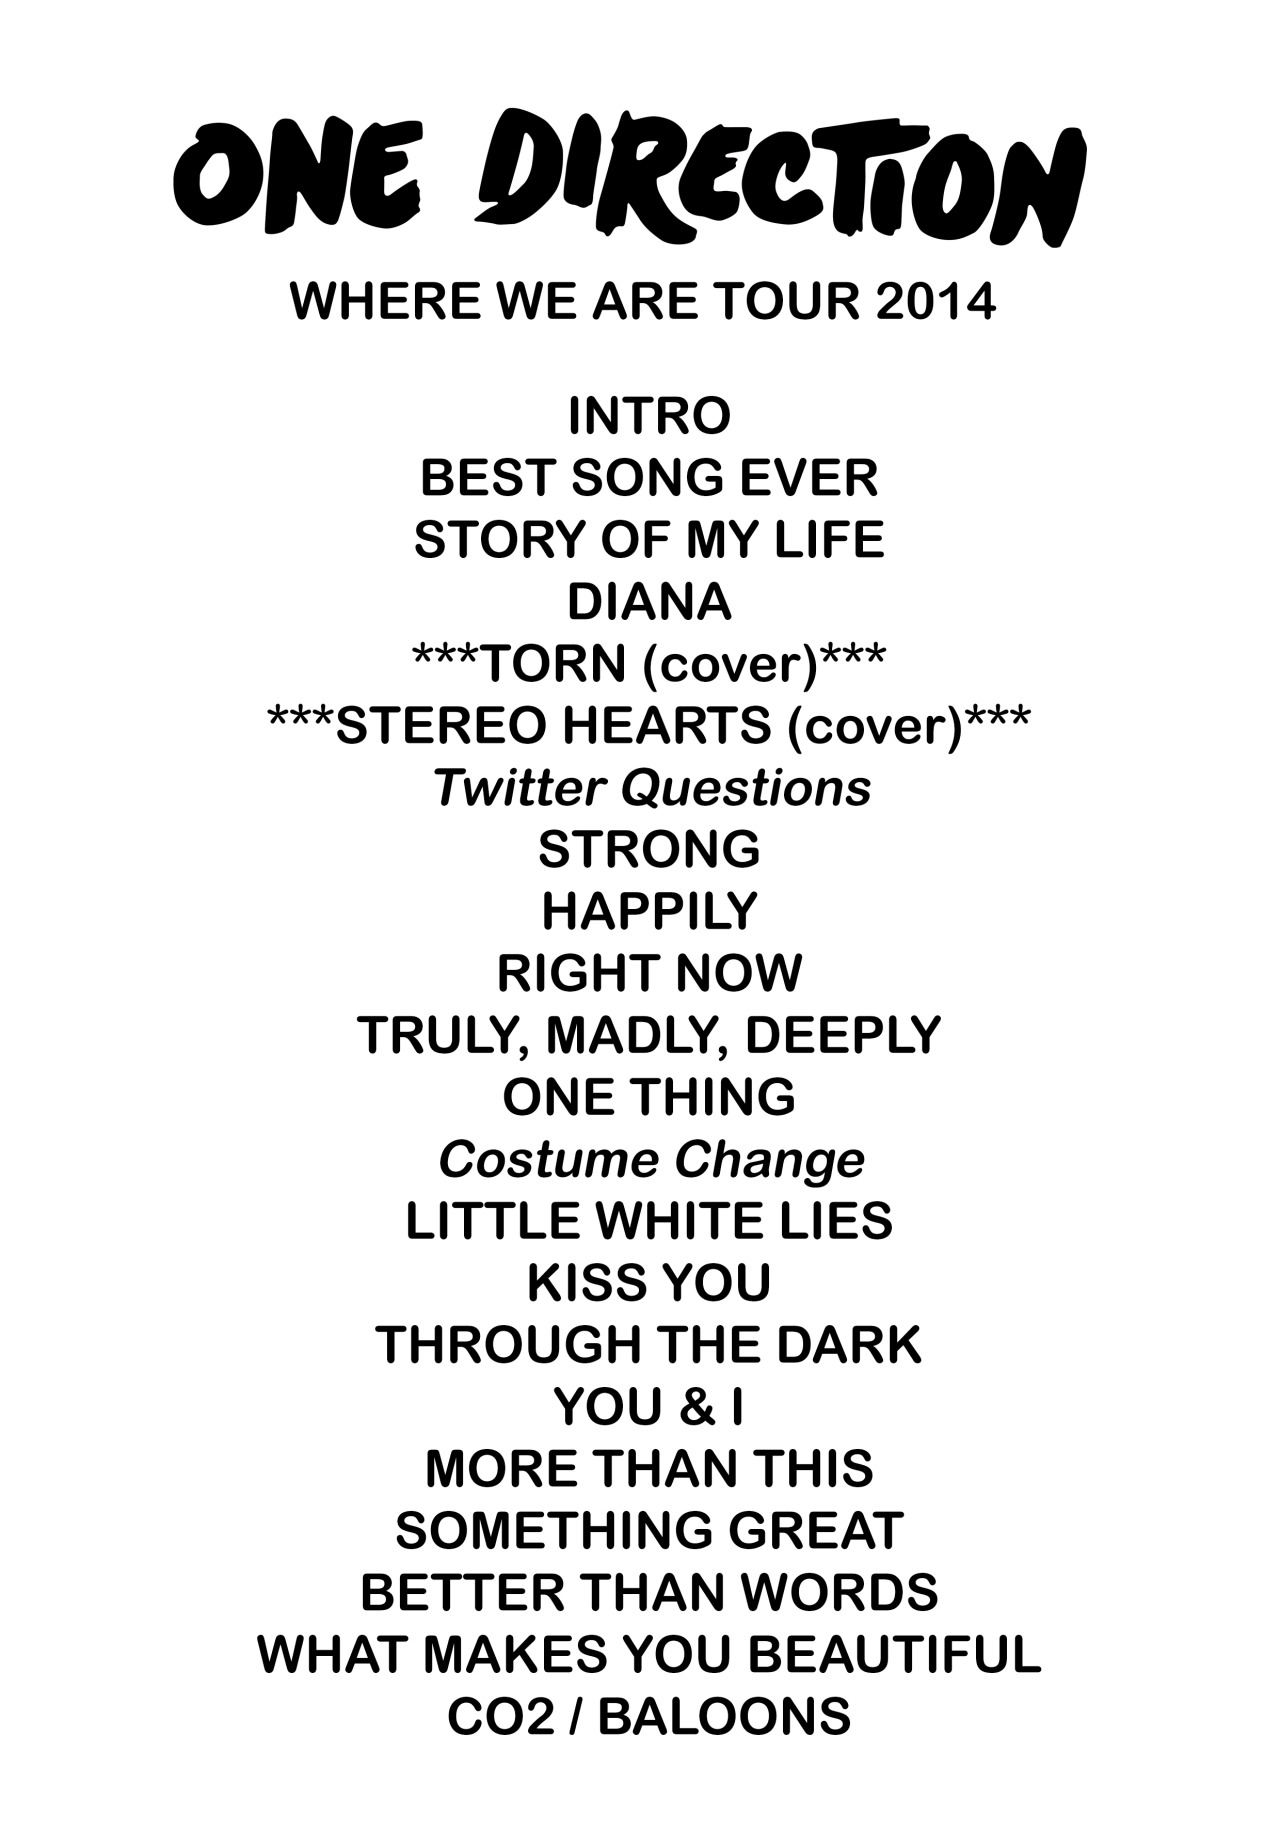 clocksx:
“lovebitesfromliam:
“idioticteen:
“ know-who-blog:
“ where we are tour 2014 setlist
”
Baloons
”
OH MY FUCKING GOD IF THEY ACTUALLY SING TRULY, MADLY, DEEPLY I WILL DIE
”
where’s midnight memories?
”